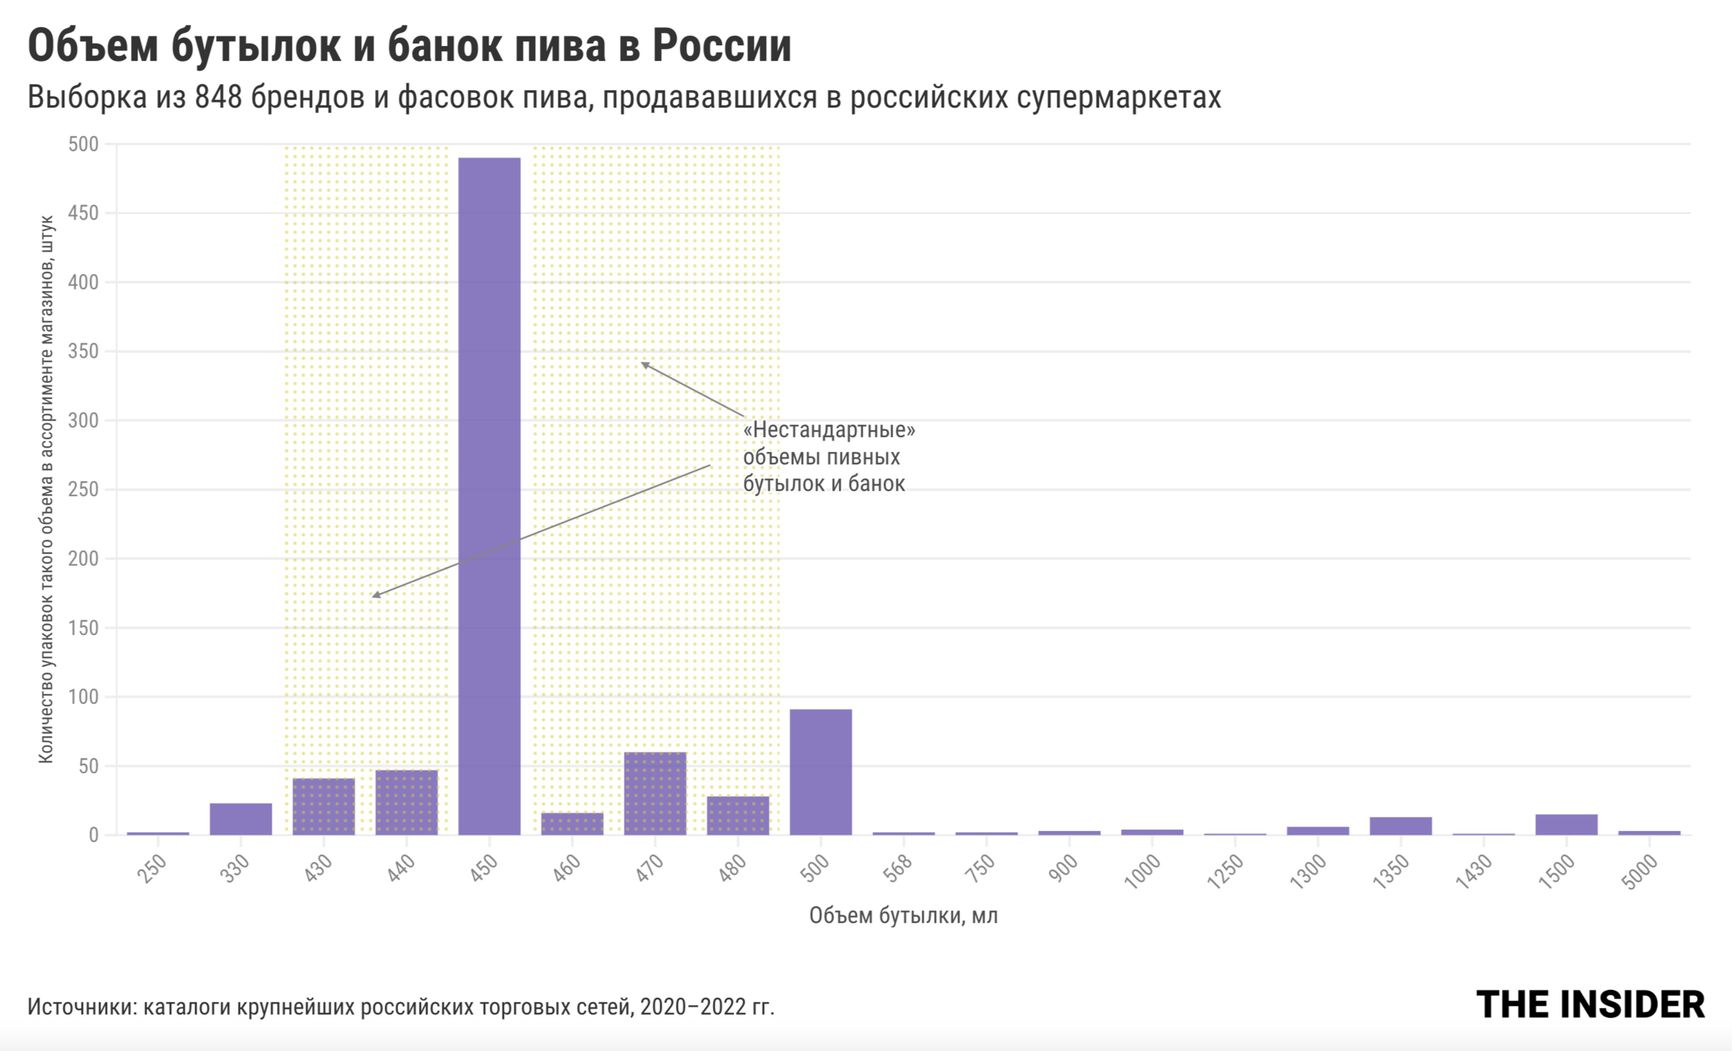 The volume of beer bottles and cans in Russia. A sample of 848 brands and volumes available in Russian supermarkets